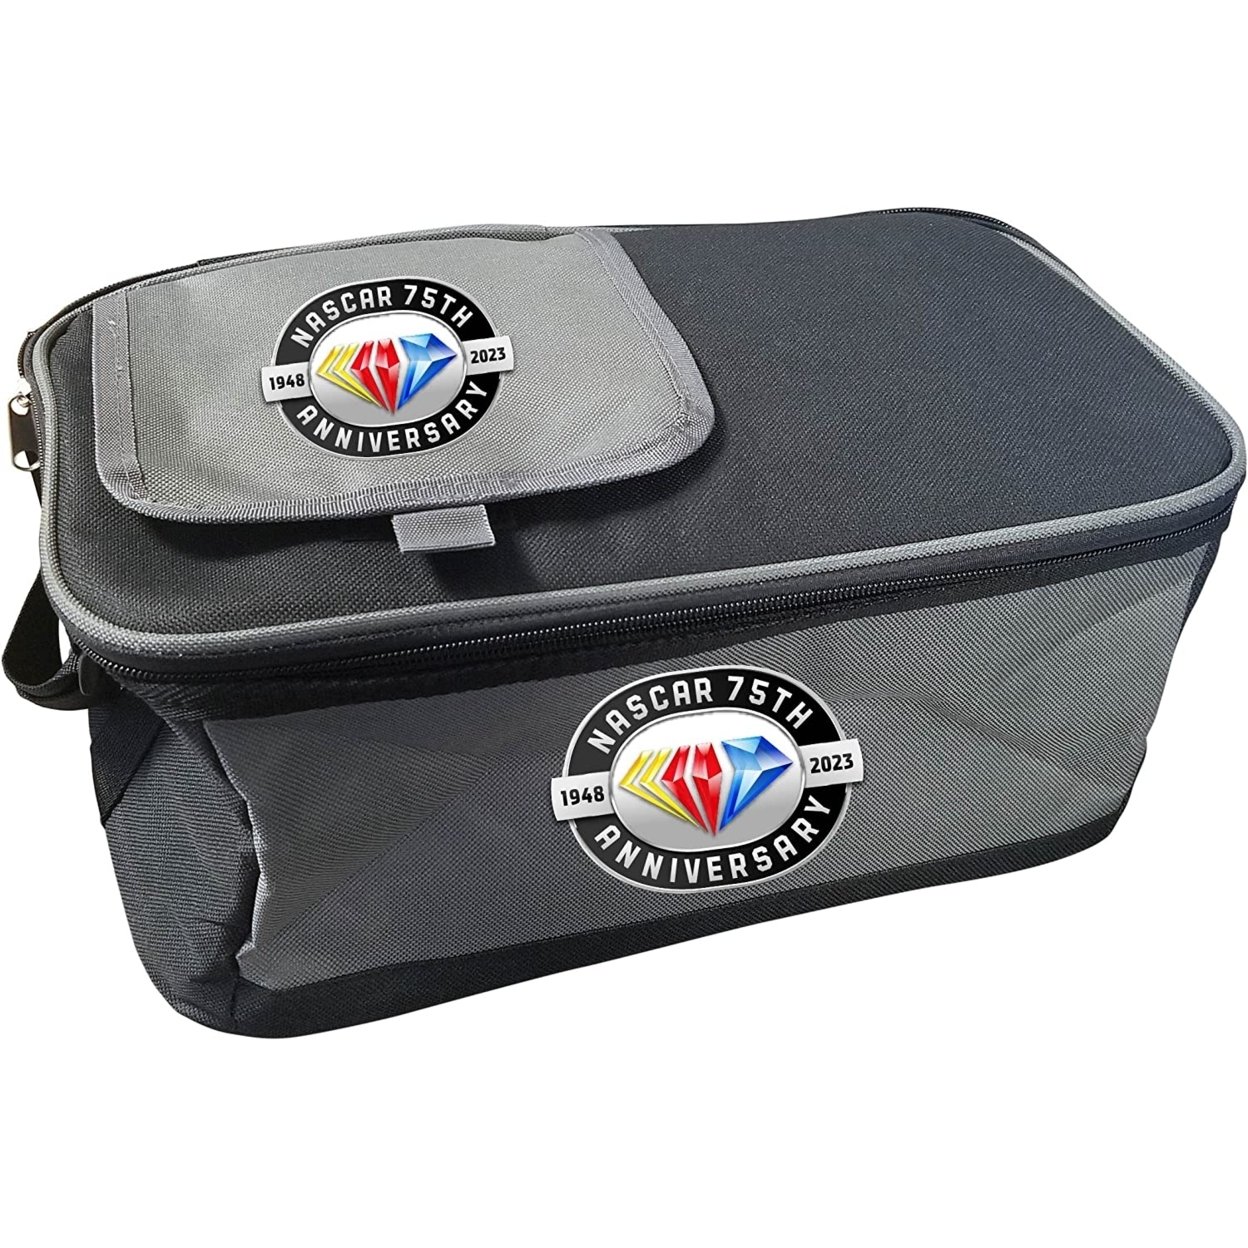 NASCAR 75 Year Anniversary Officially Licensed 9 Pack Cooler